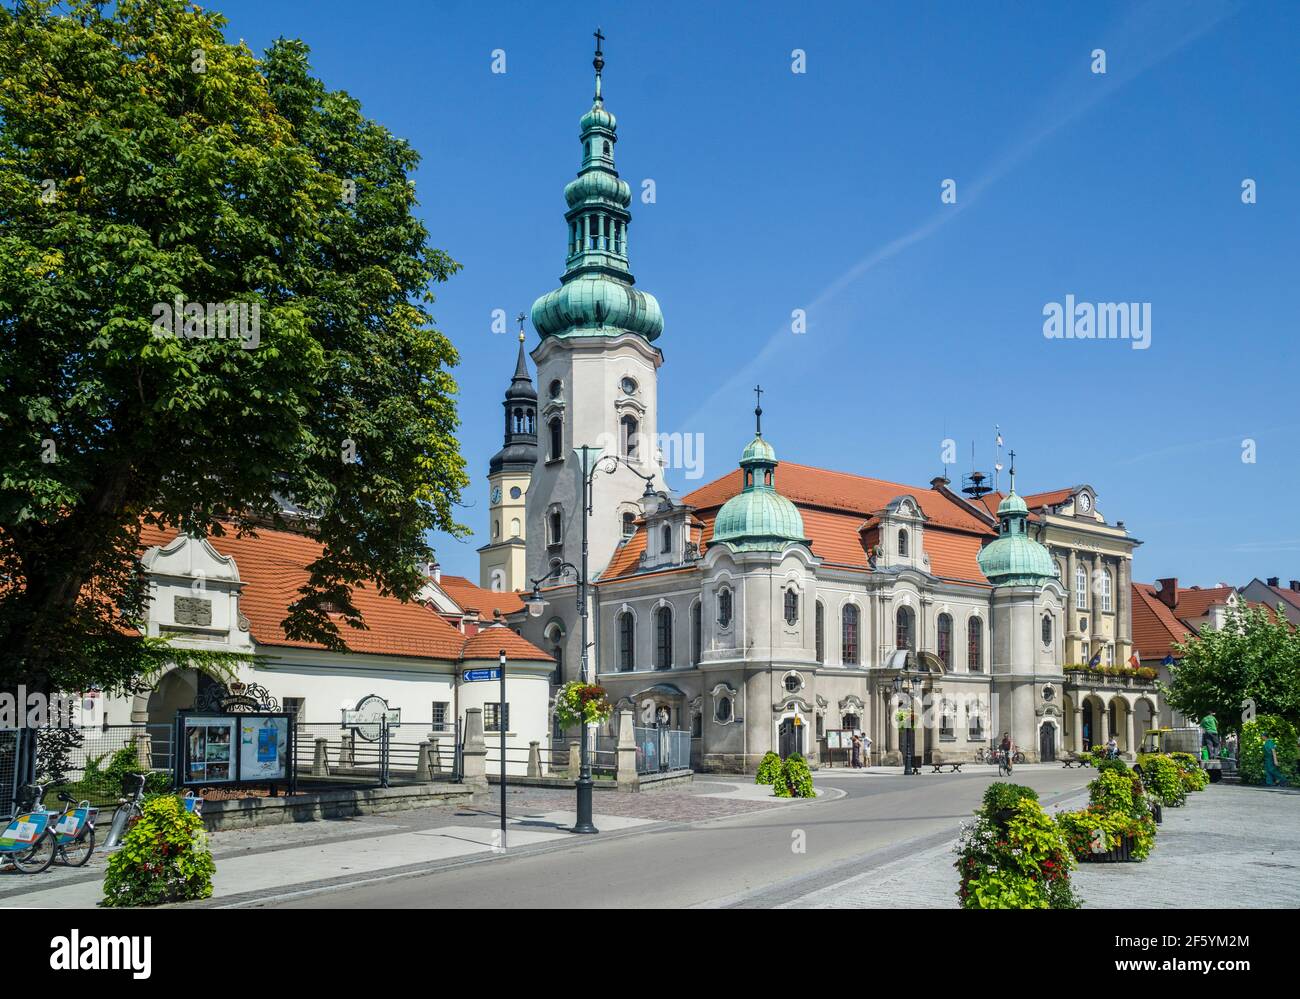 Poland, Silesian Voivodship, Pszczyna (Pless), view of the Neo-baroque Protestant Church, seen from the gate house of Pszczyna Castle Stock Photo